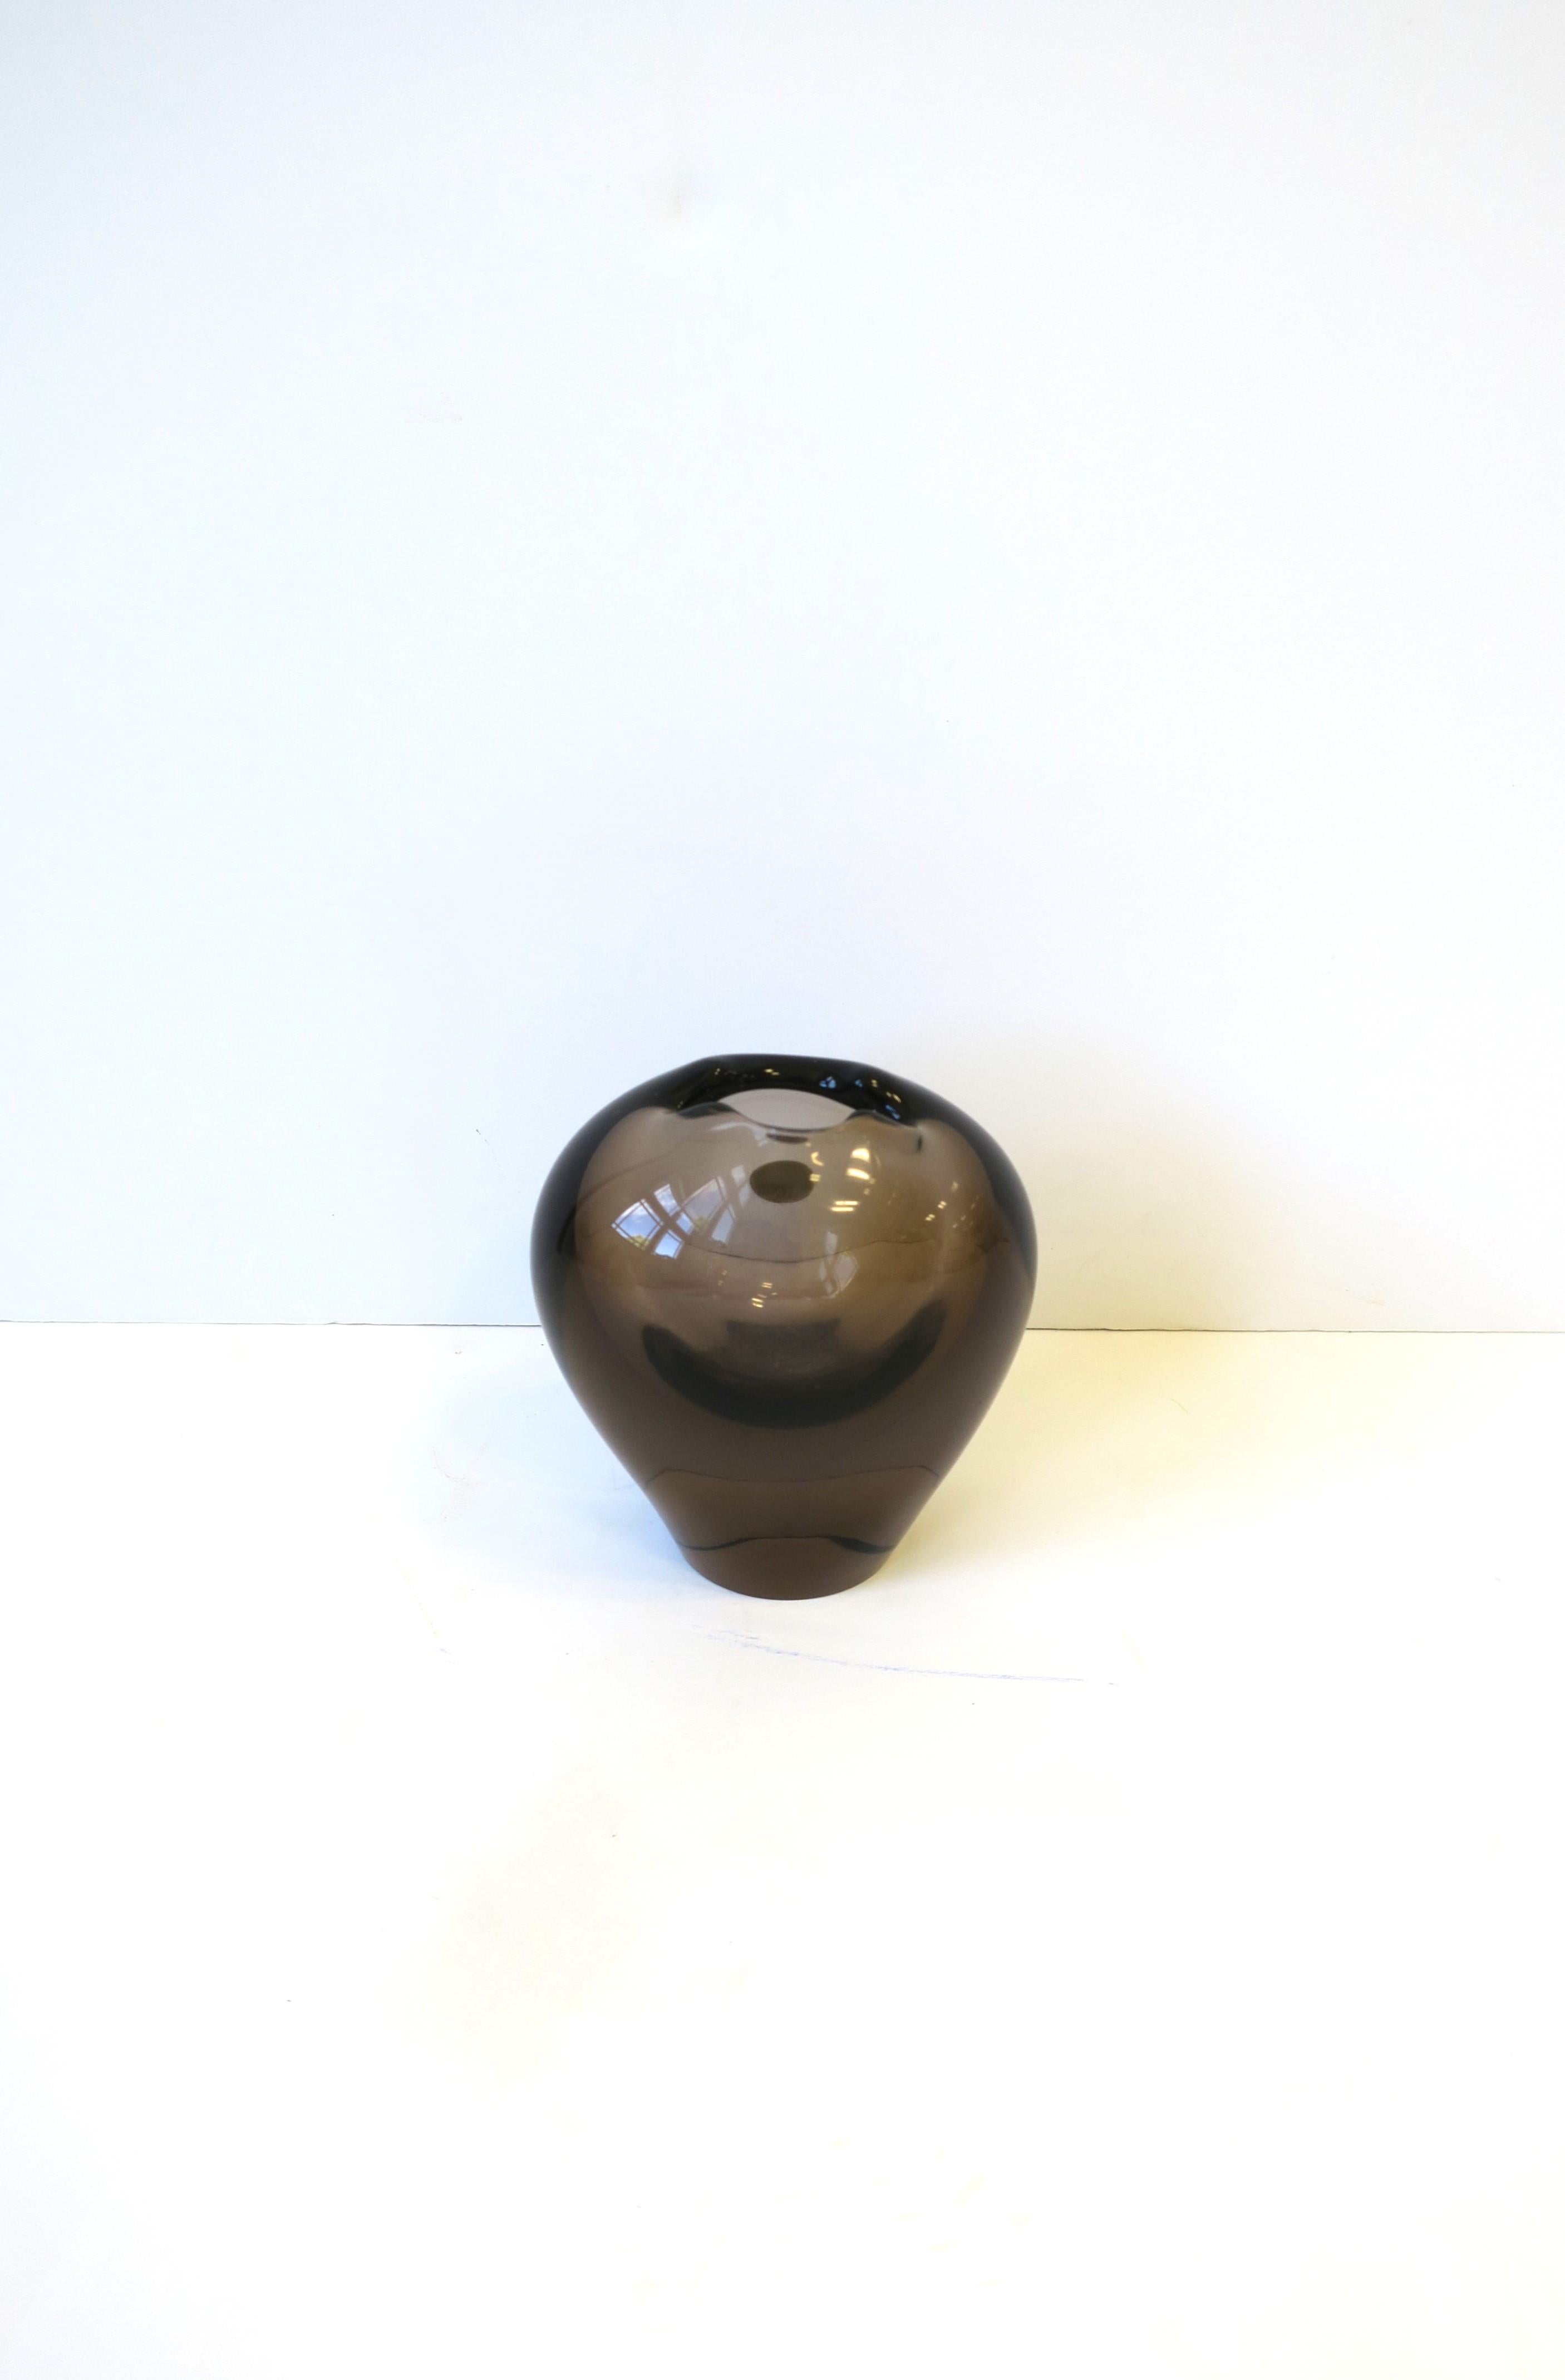 A small and substantial hand-crafted art glass vase in an organic bulbus form, Czechoslovakia, circa mid-20th century. Vase has a graduated smokey plum hue. Beautiful as a standalone piece, or with a few small flowers. Piece is hand-crafted from